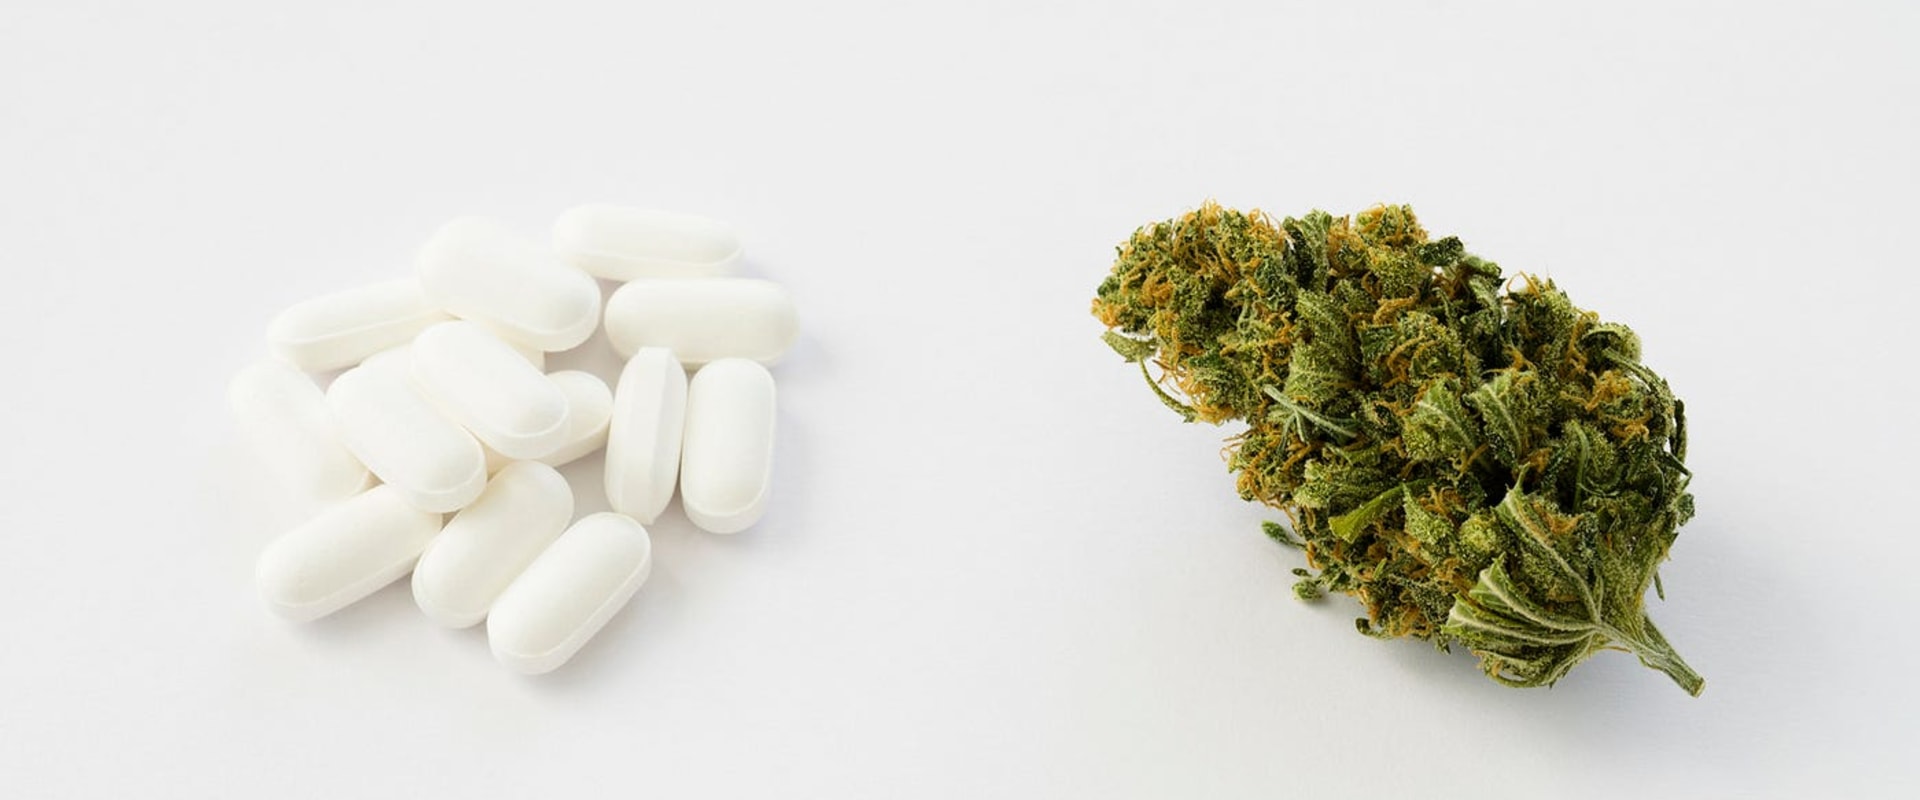 Can CBD Replace Ibuprofen for Pain Relief?